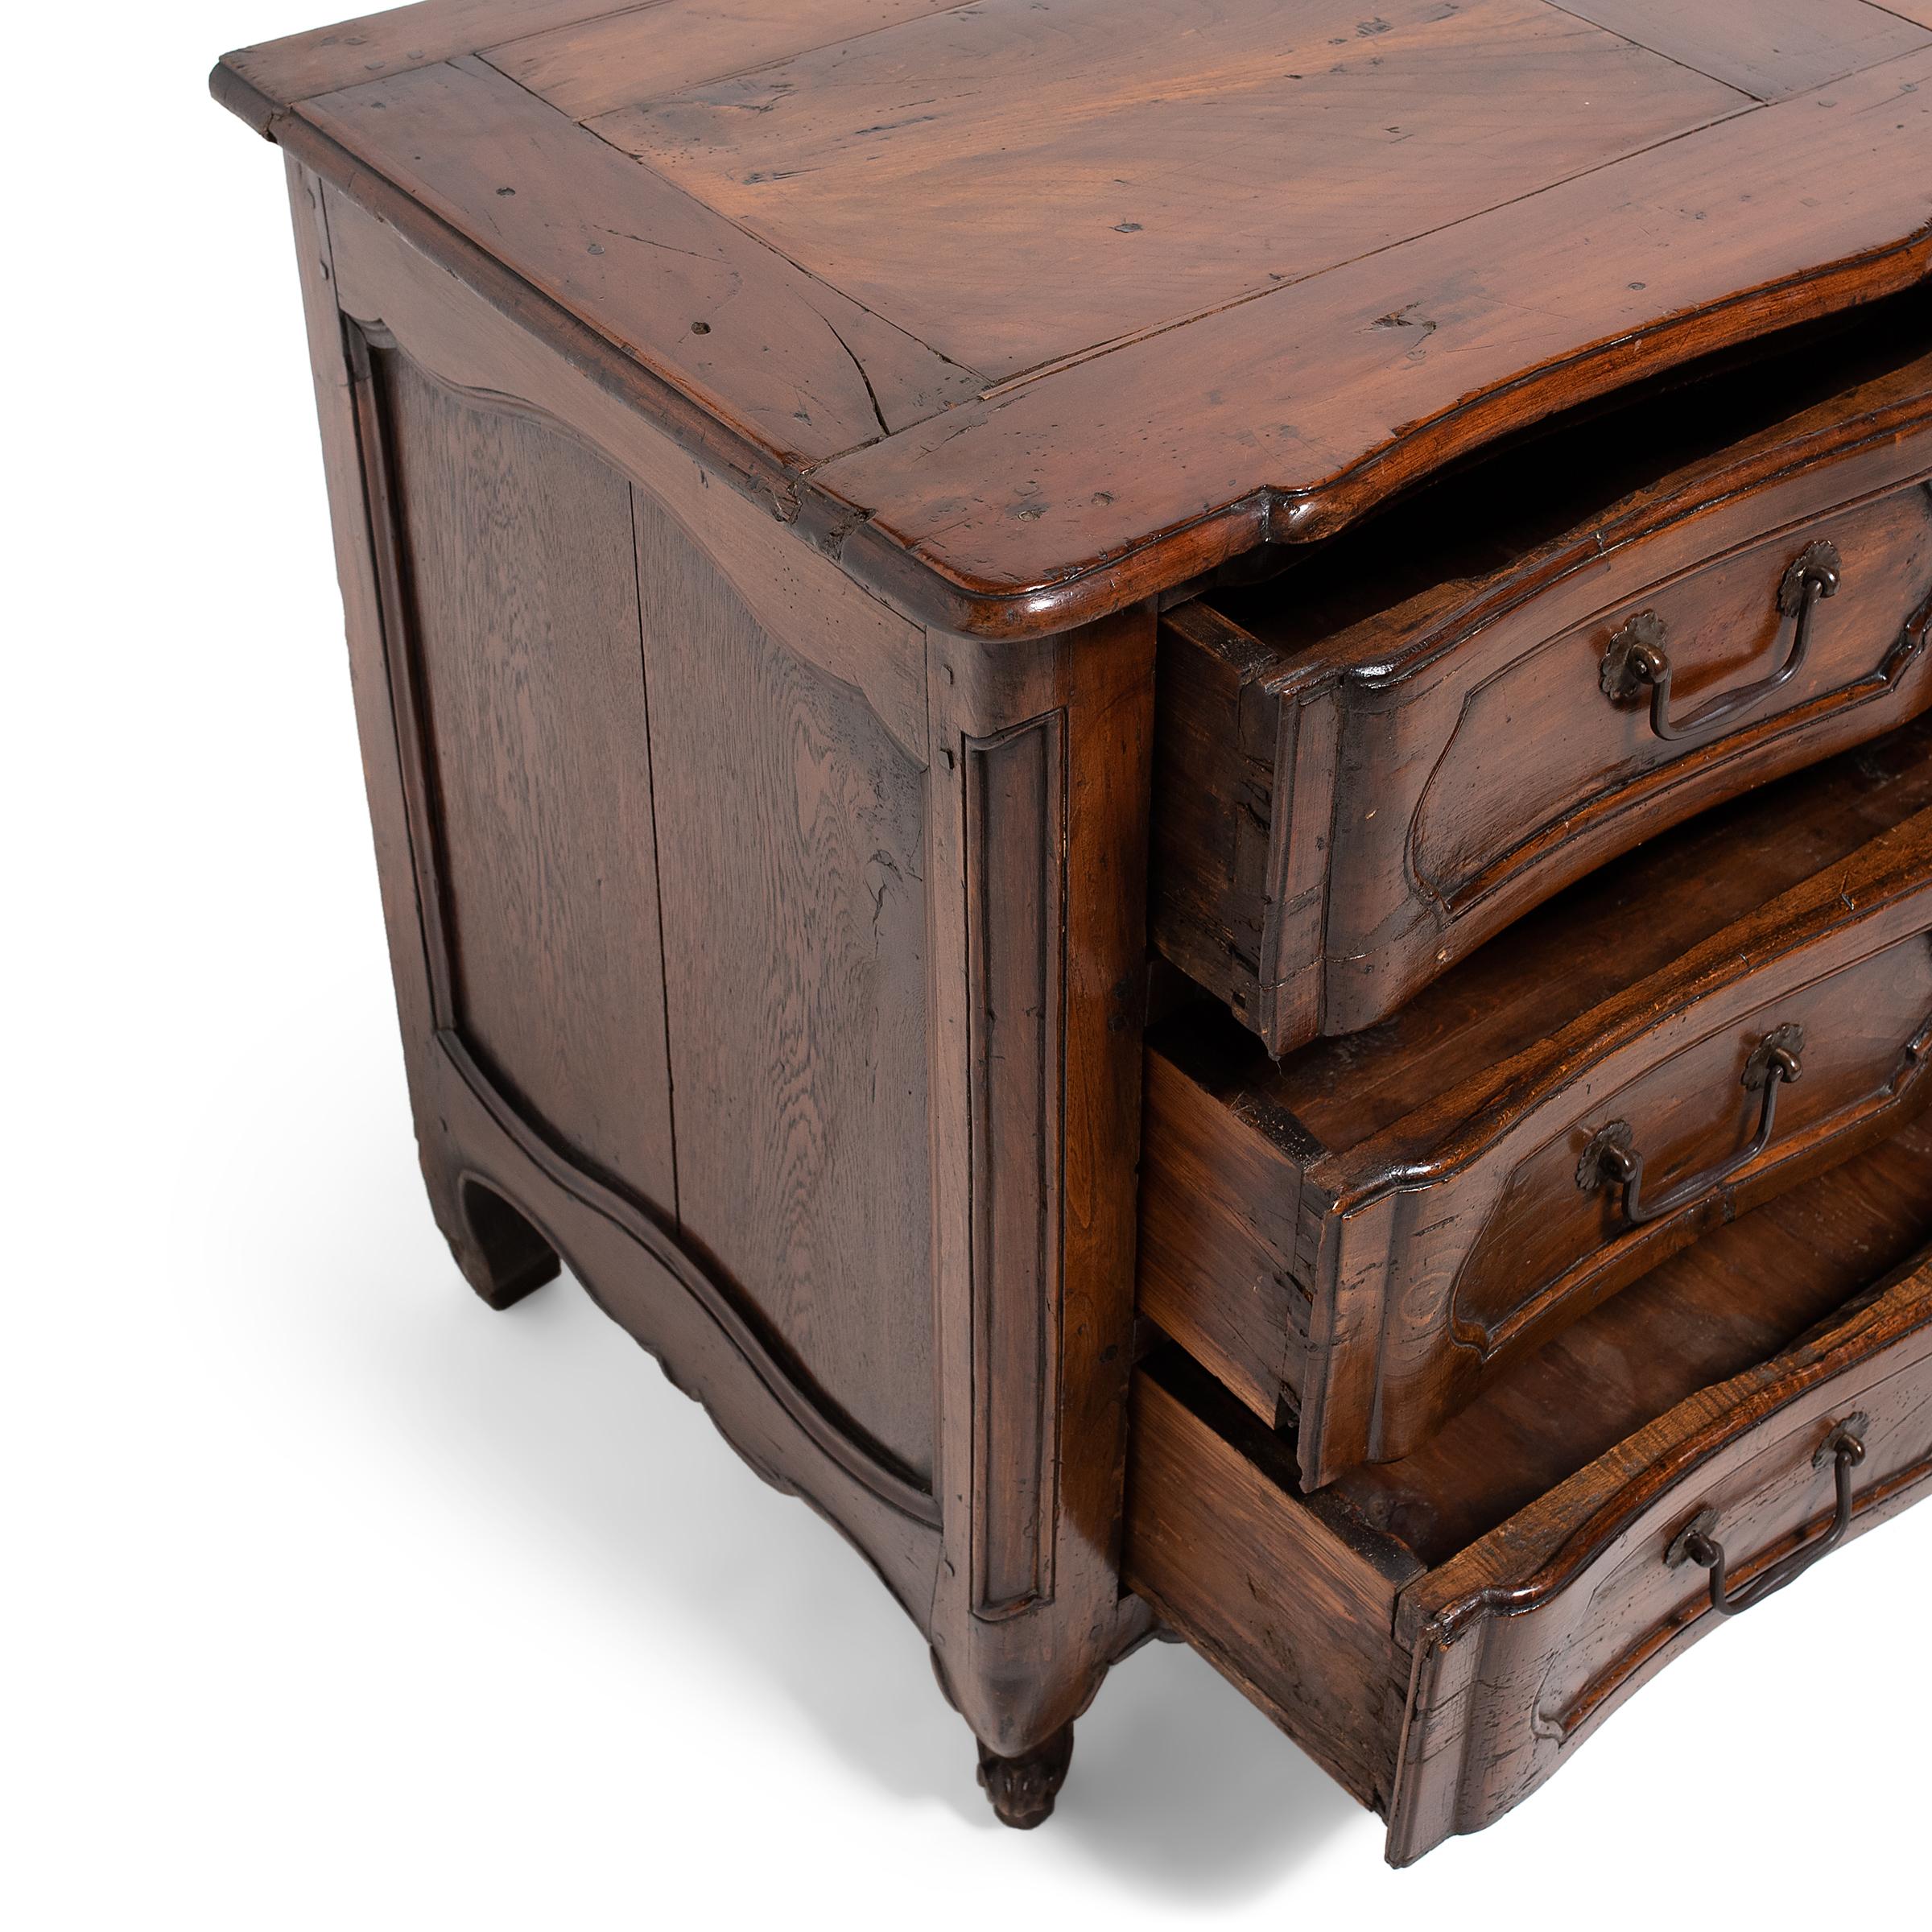 19th Century French Provincial Three Drawer Commode, c. 1800